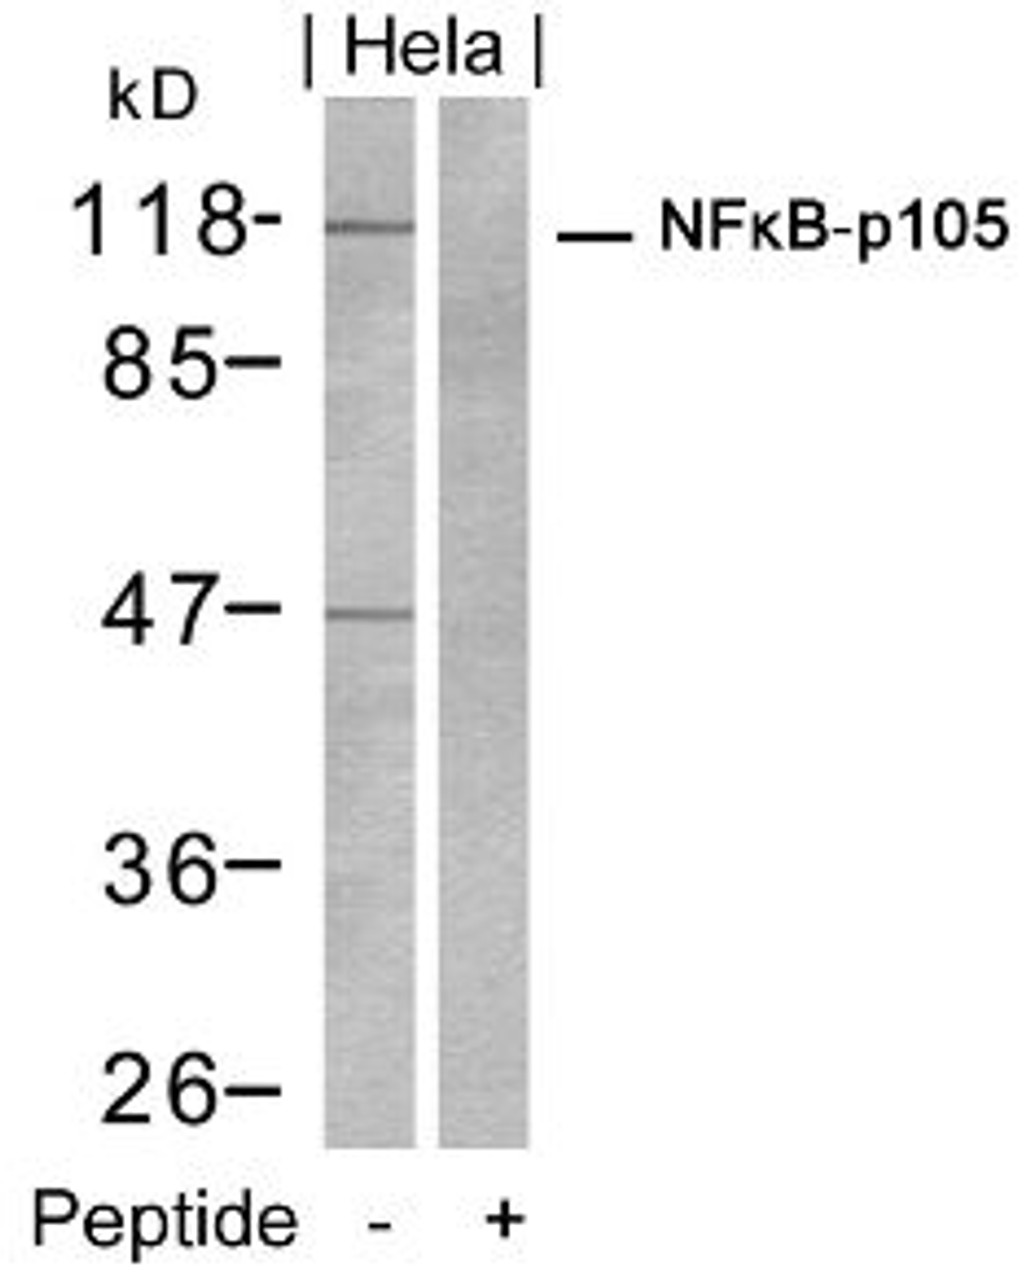 Western blot analysis of lysed extracts from HeLa cells using NF&#954;B-p105/p50 (Ab-932) .